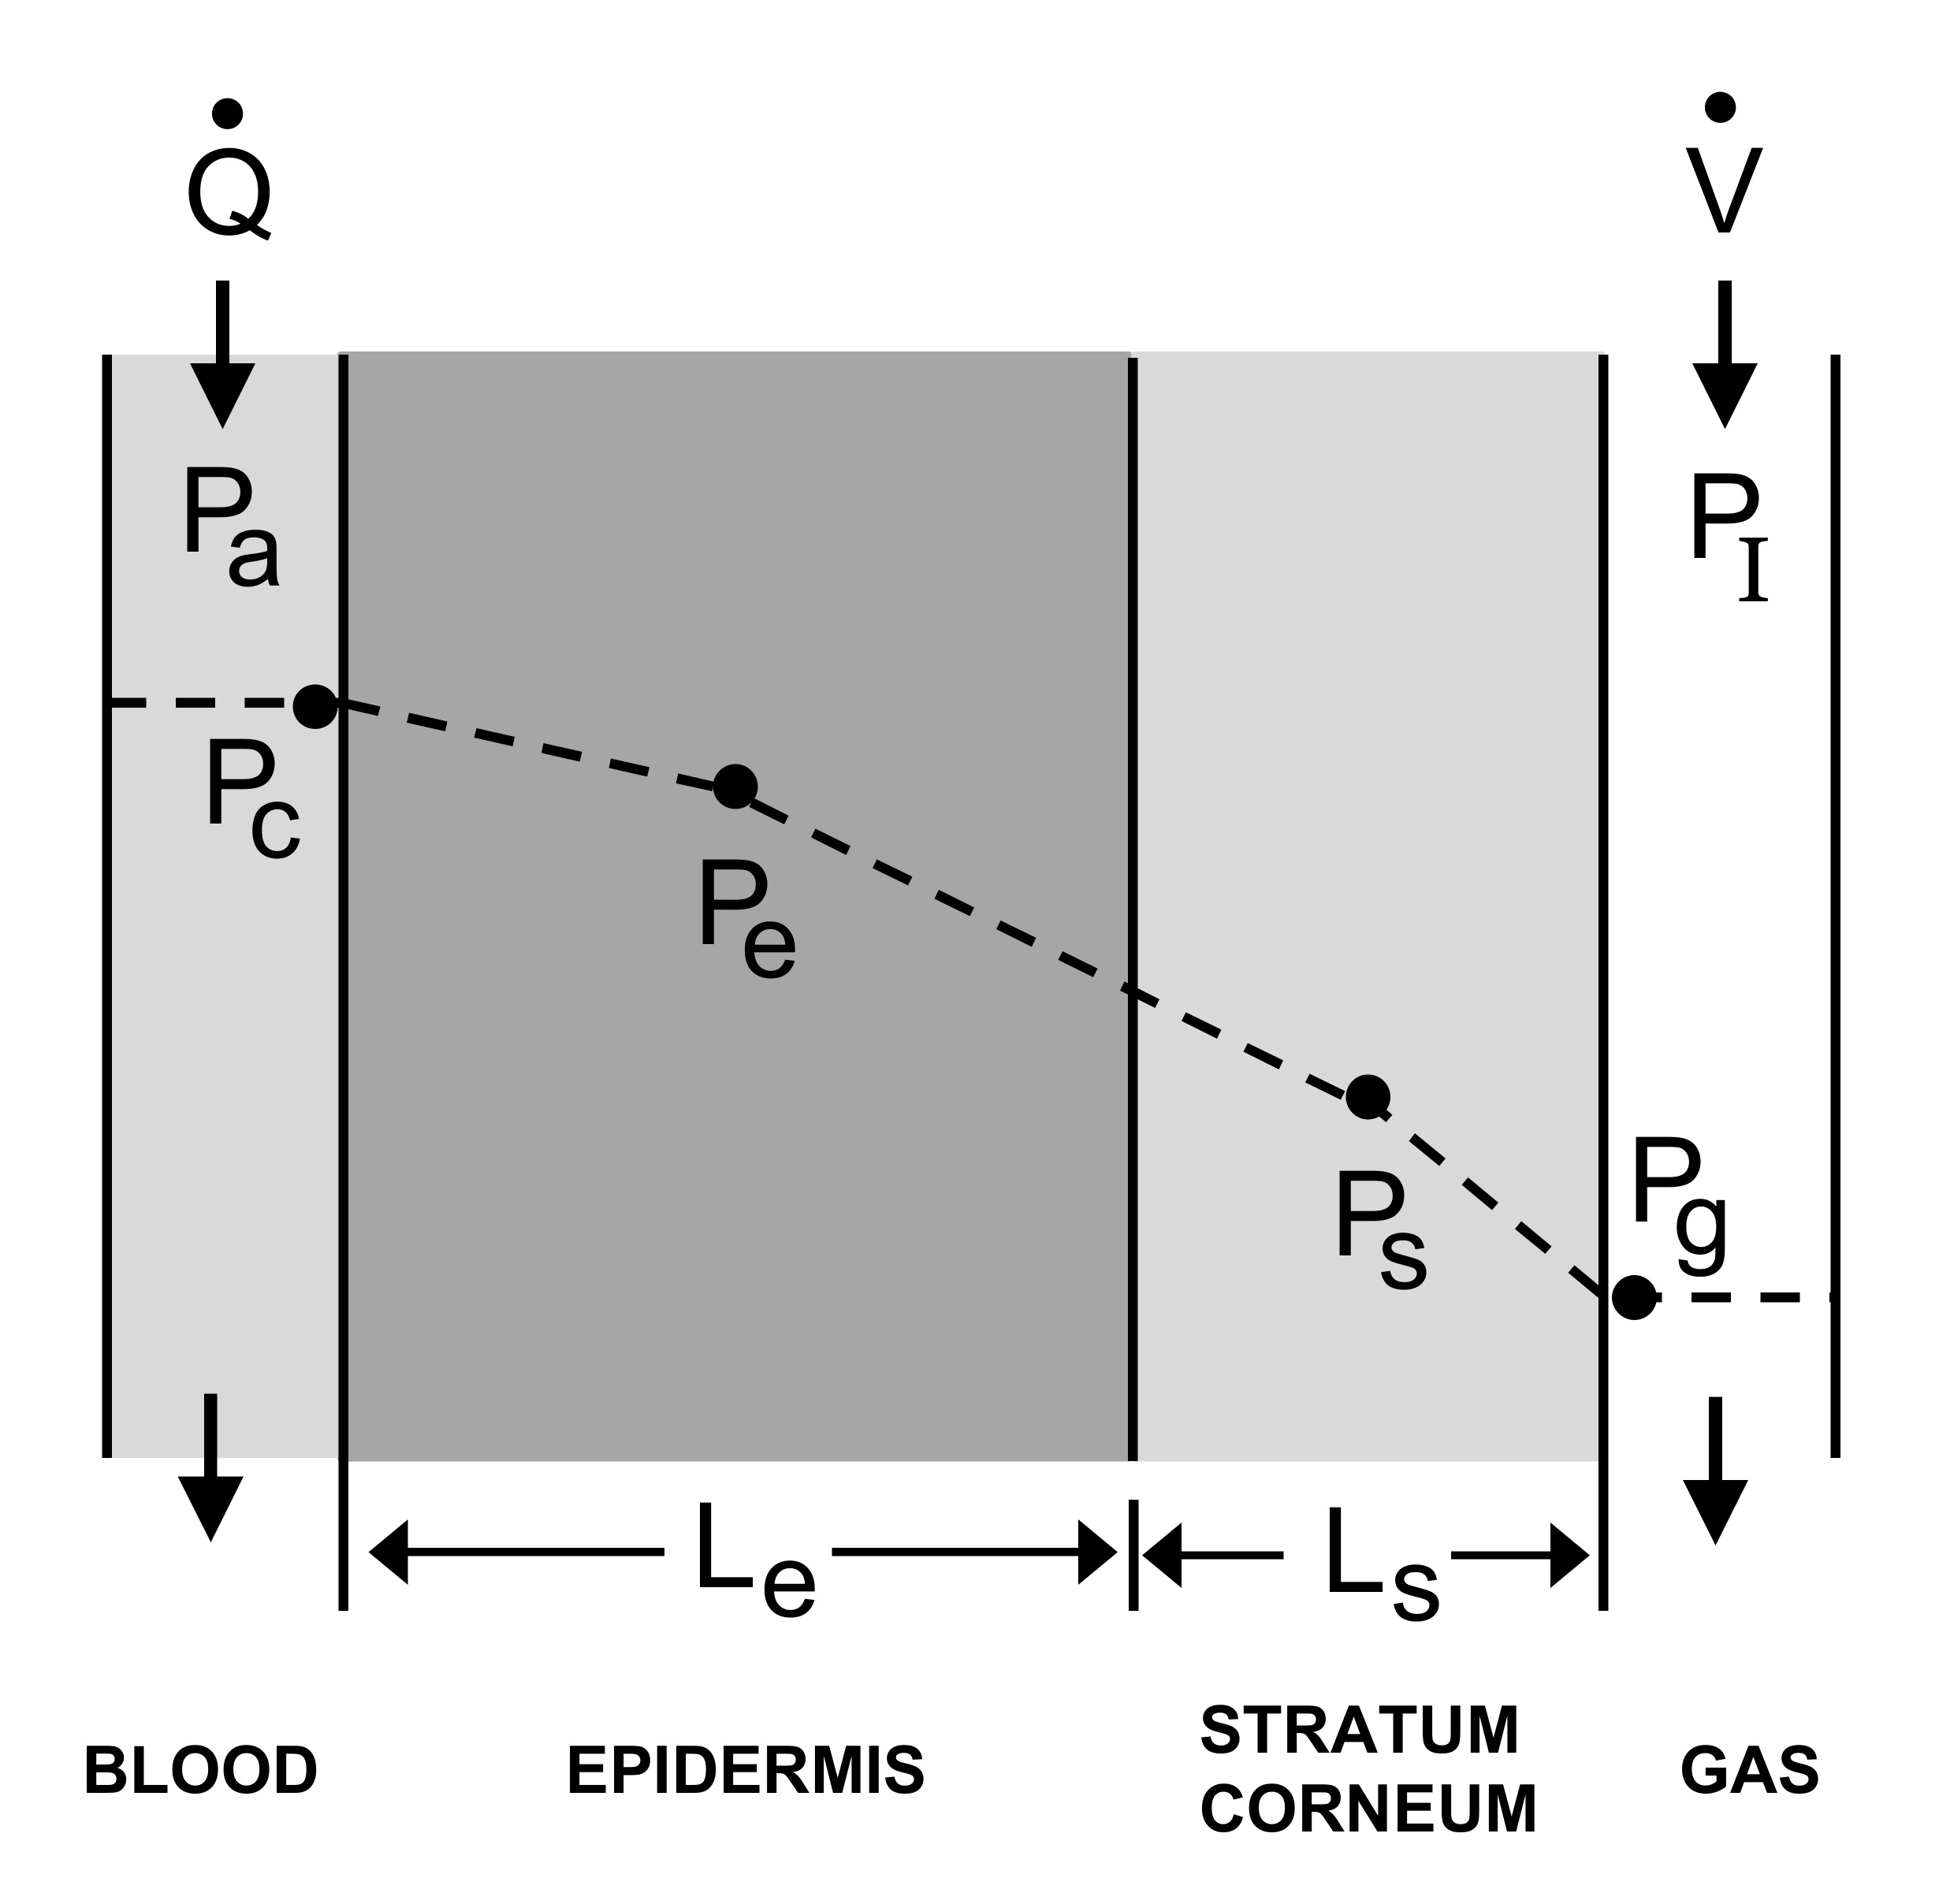 Schematic showing a cross-section of skin next to a device for measuring supradermal ethanol concentration. Ethanol entering the system via the blood diffuses through the epidermis and stratum corneum before entering the gas compartment and is removed from the system by convective gas flow(V˙ ). A differential length (dx) was used for mathematical analysis. Pa, Pc, Pe, Pg, Ps, arterial, capillary, epidermal, gas, and stratum corneum ethanol partial pressures, respectively.